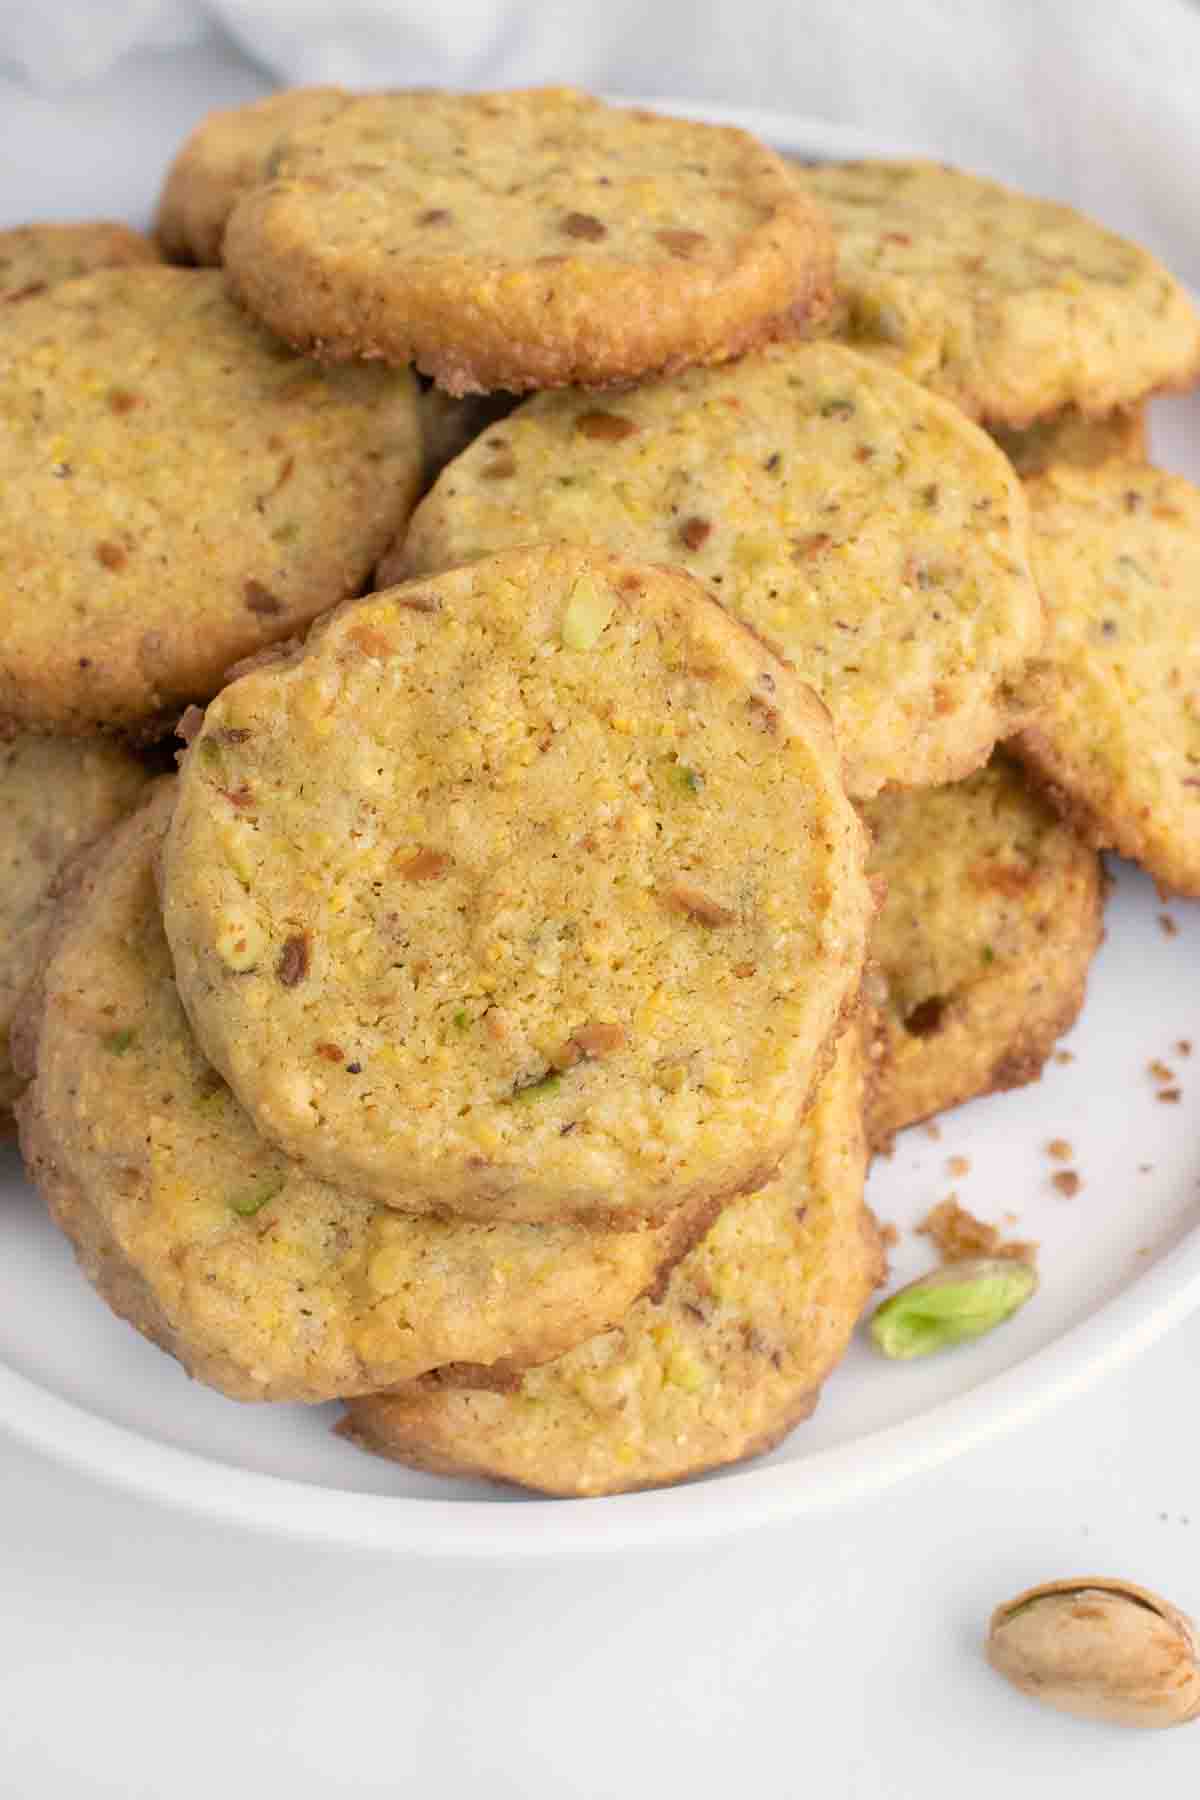 cornmeal pistachio butter cookies on a white plate